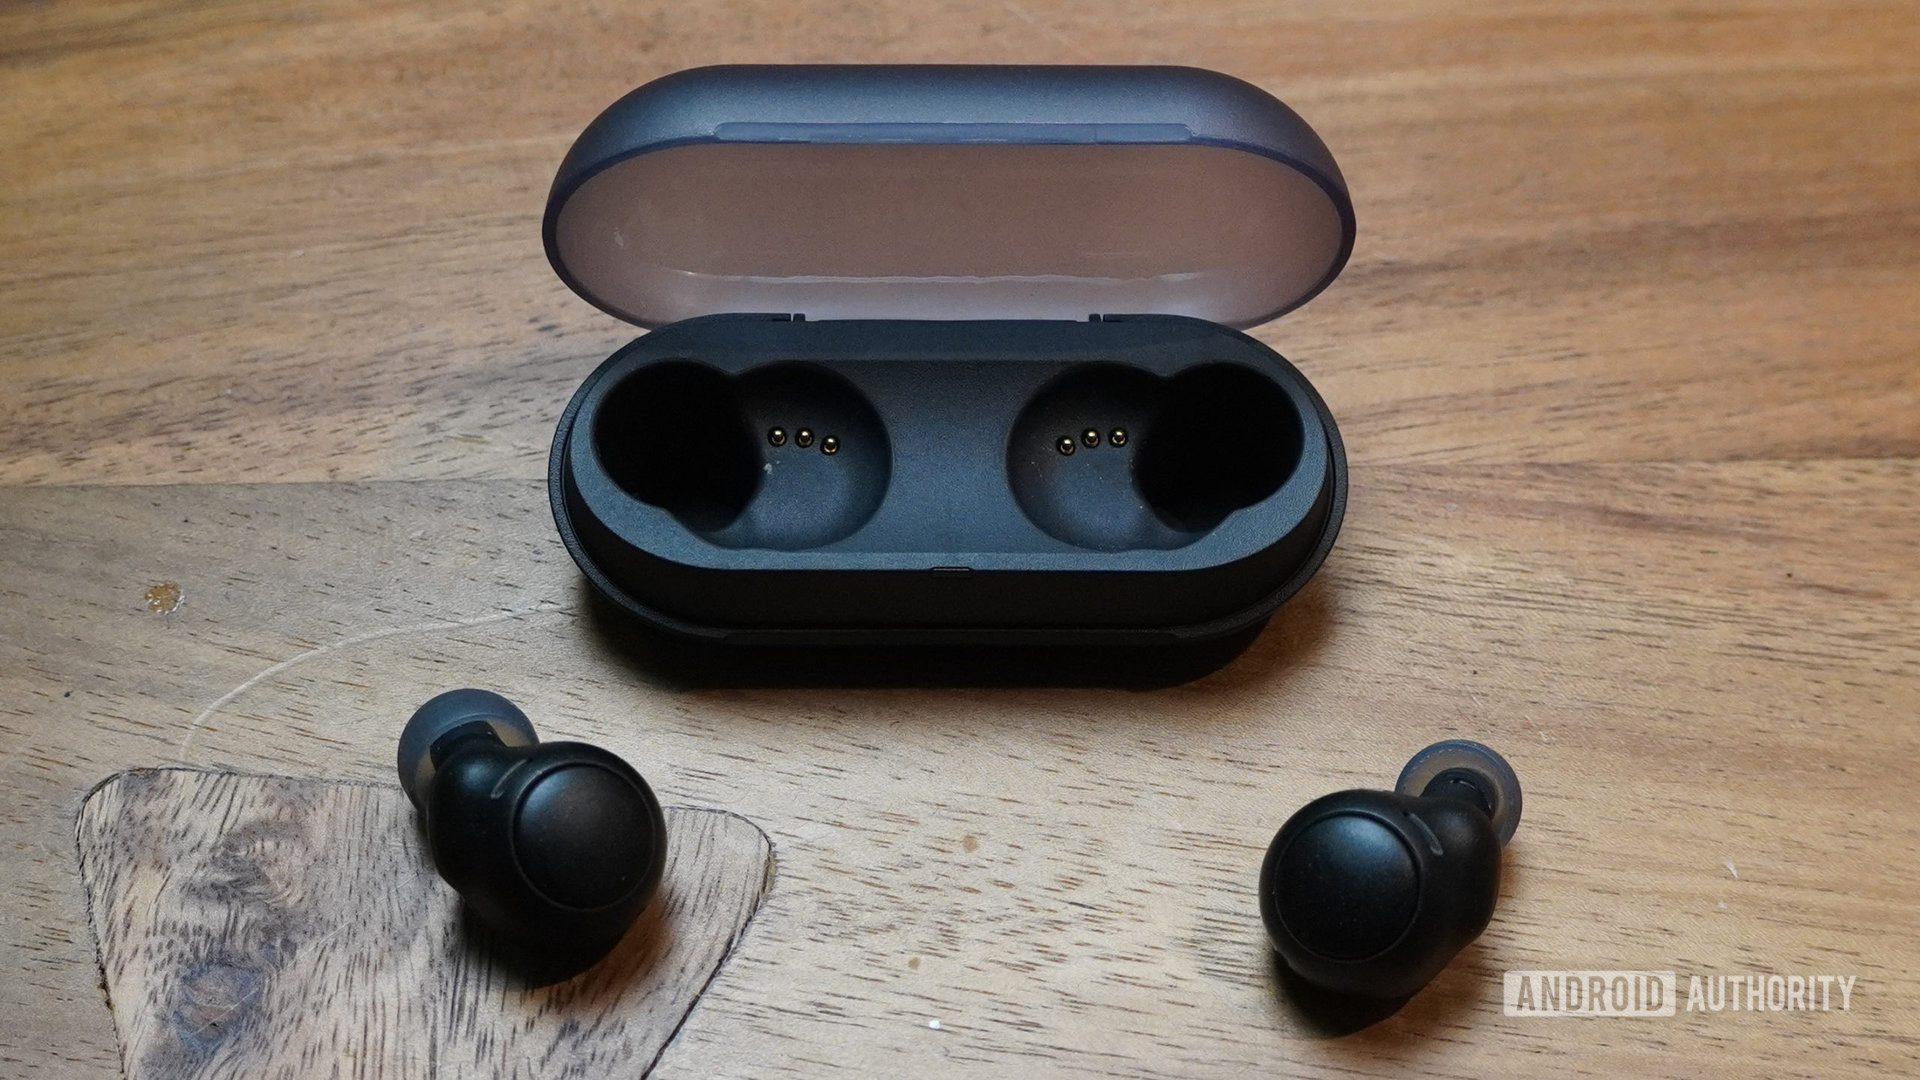 The Sony WF-C500 earbuds lying outside of their case next to a smartphone phone on a table.